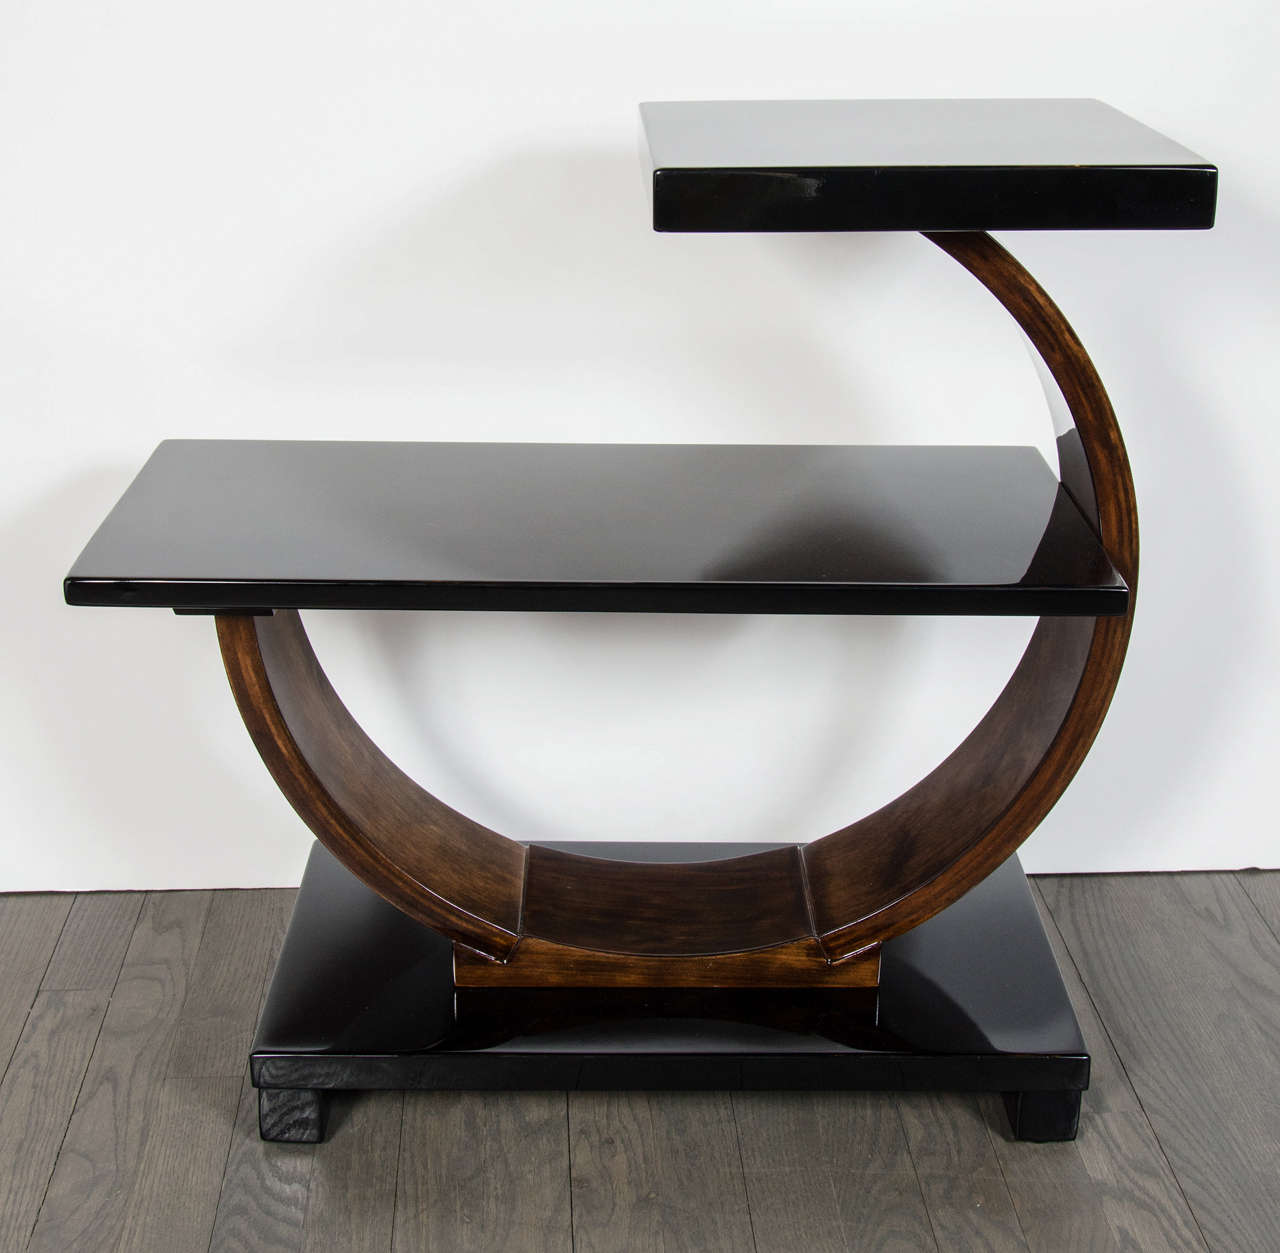 This Art Deco side table by Modernage features a sculptural two tired circular design with a larger lower shelf and smaller top tier supported by an half arc making this piece geometrically interesting and distinctive. It consists of ebonized walnut